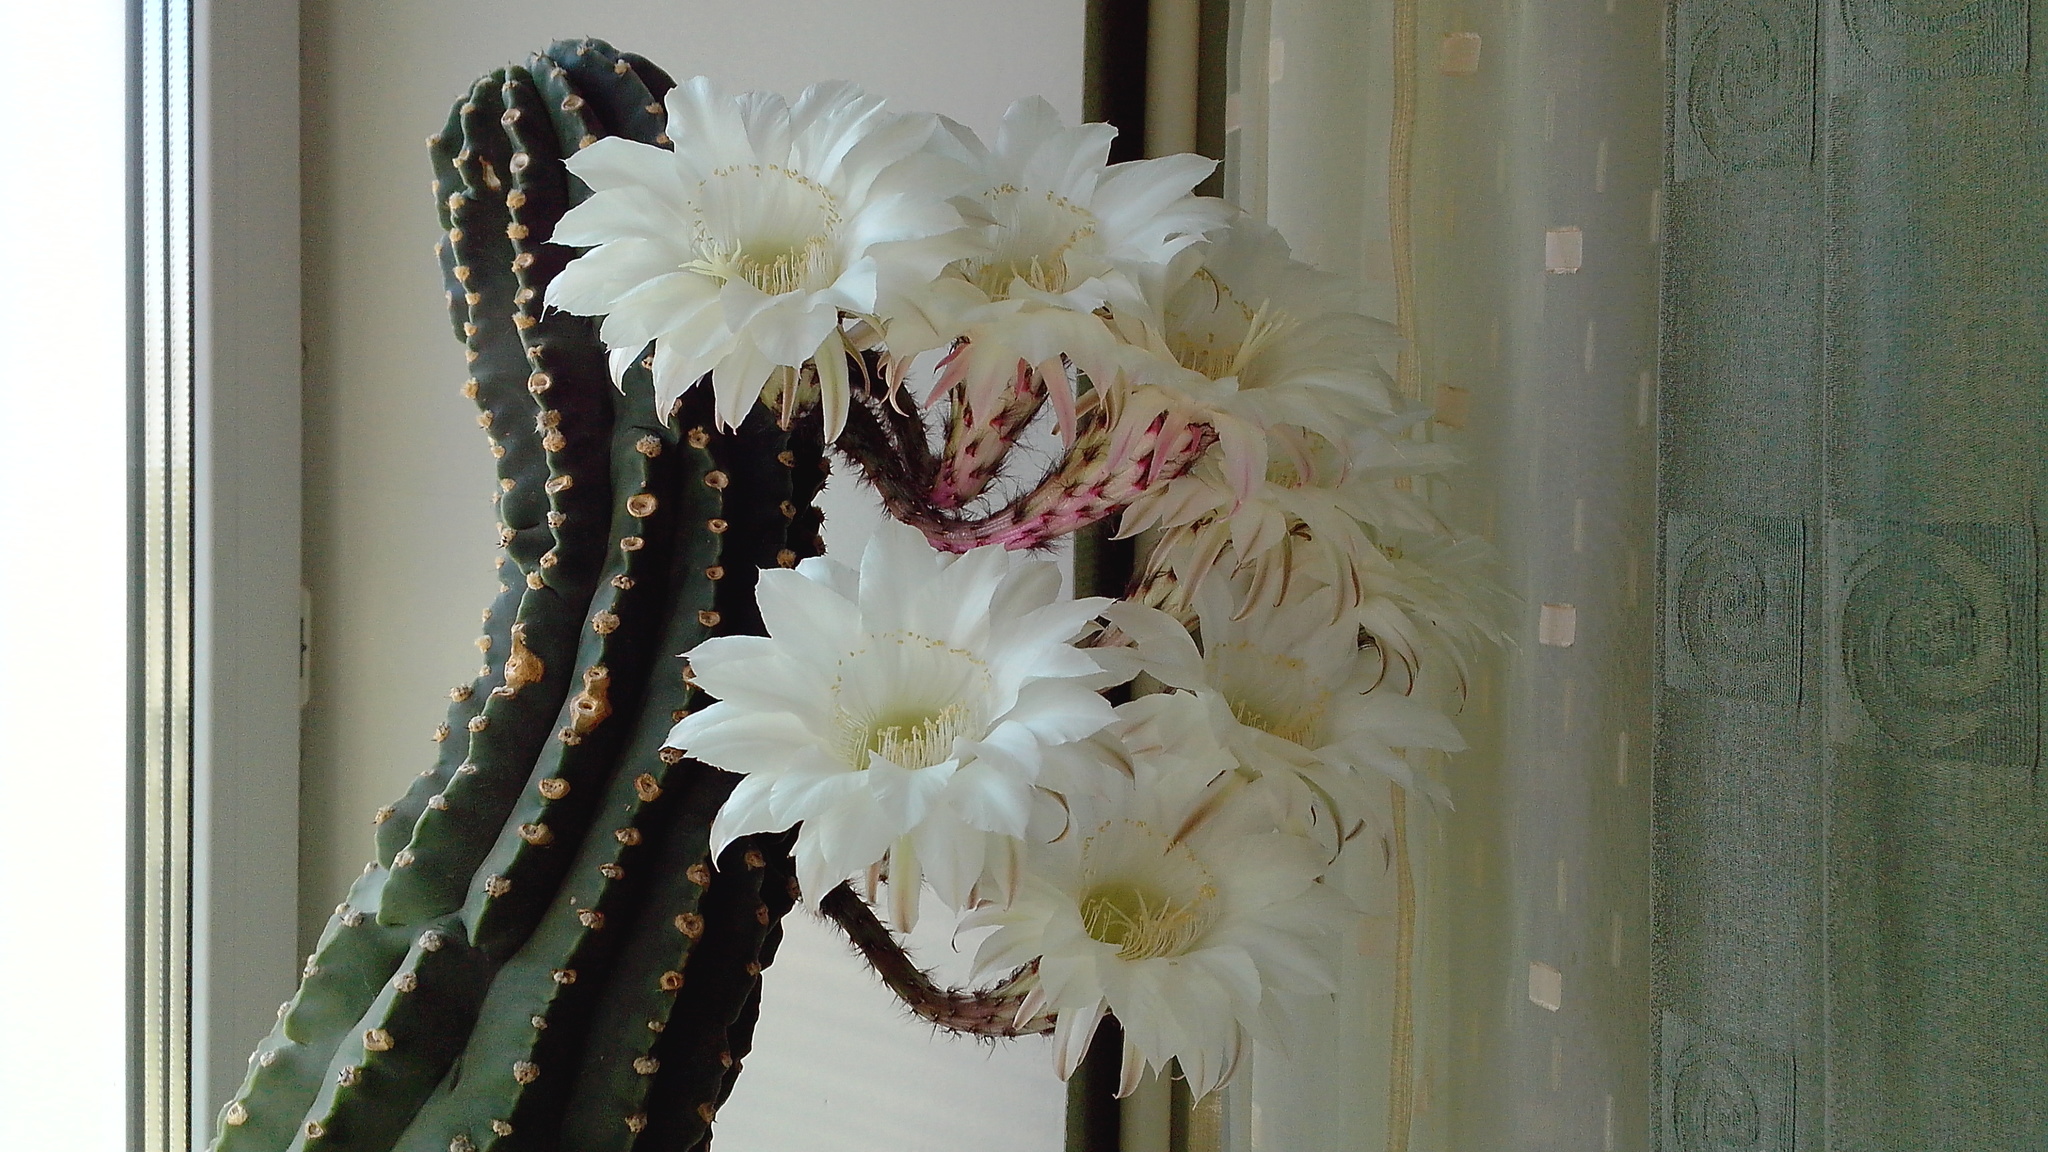 The cactus bloomed - My, Cactus, Echinopsis cactus, Blooming cacti, Houseplants, Flowers, The photo